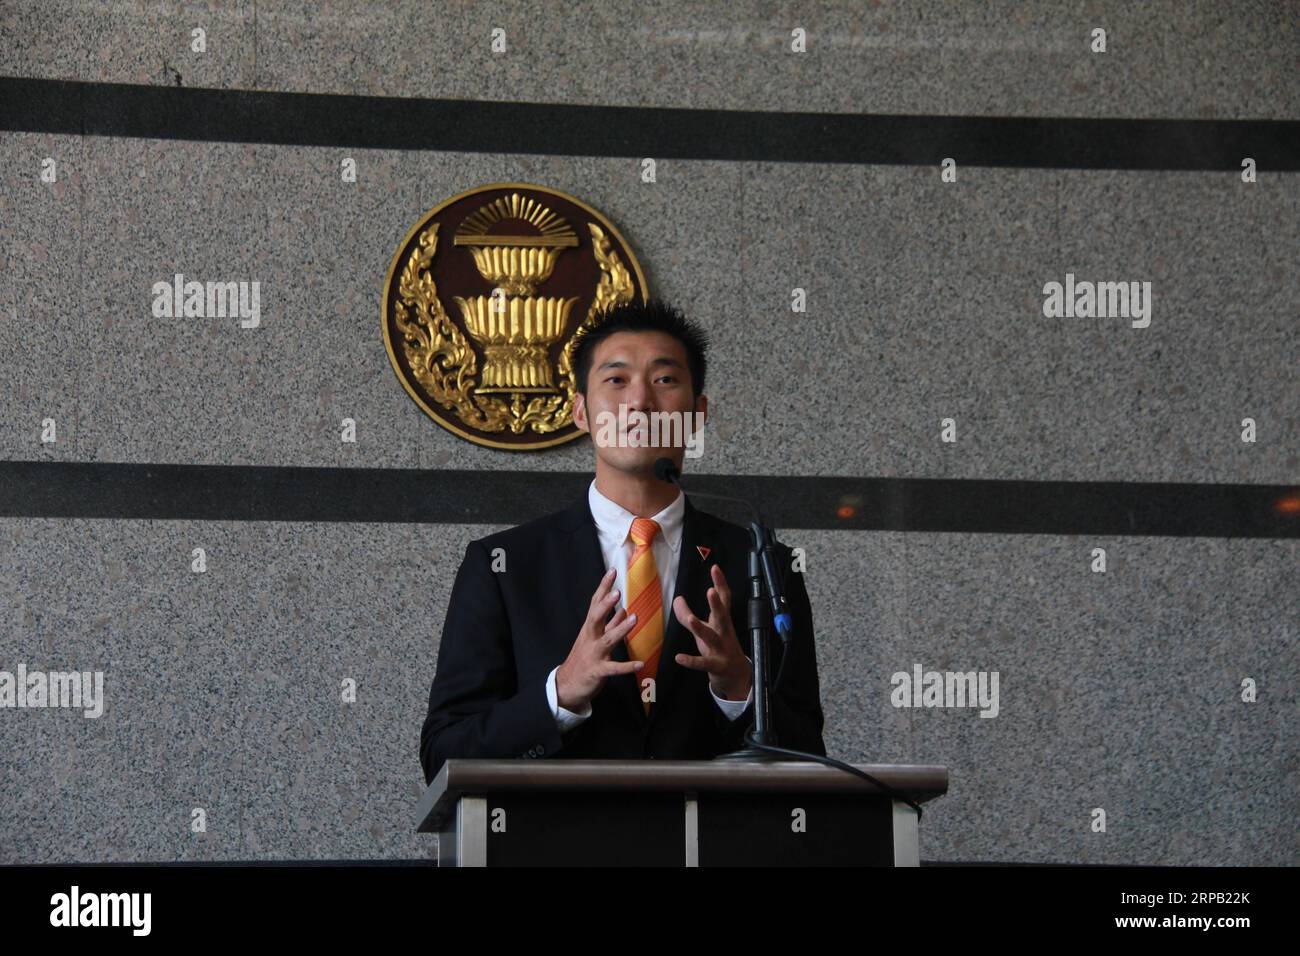 (190525) -- BANGKOK, May 25, 2019 (Xinhua) -- Thailand s Future Forward party leader Thanathorn Juangroongruangkit speaks during a press conference held at the TOT head office in Bangkok, Thailand, May 25, 2019. Thanathorn on Saturday officially ceased his duty as MP according to a court order, minutes after being sworn in. (Xinhua/Yang Zhou) THAILAND-BANGKOK-THANATHORN-MP DUTY PUBLICATIONxNOTxINxCHN Stock Photo